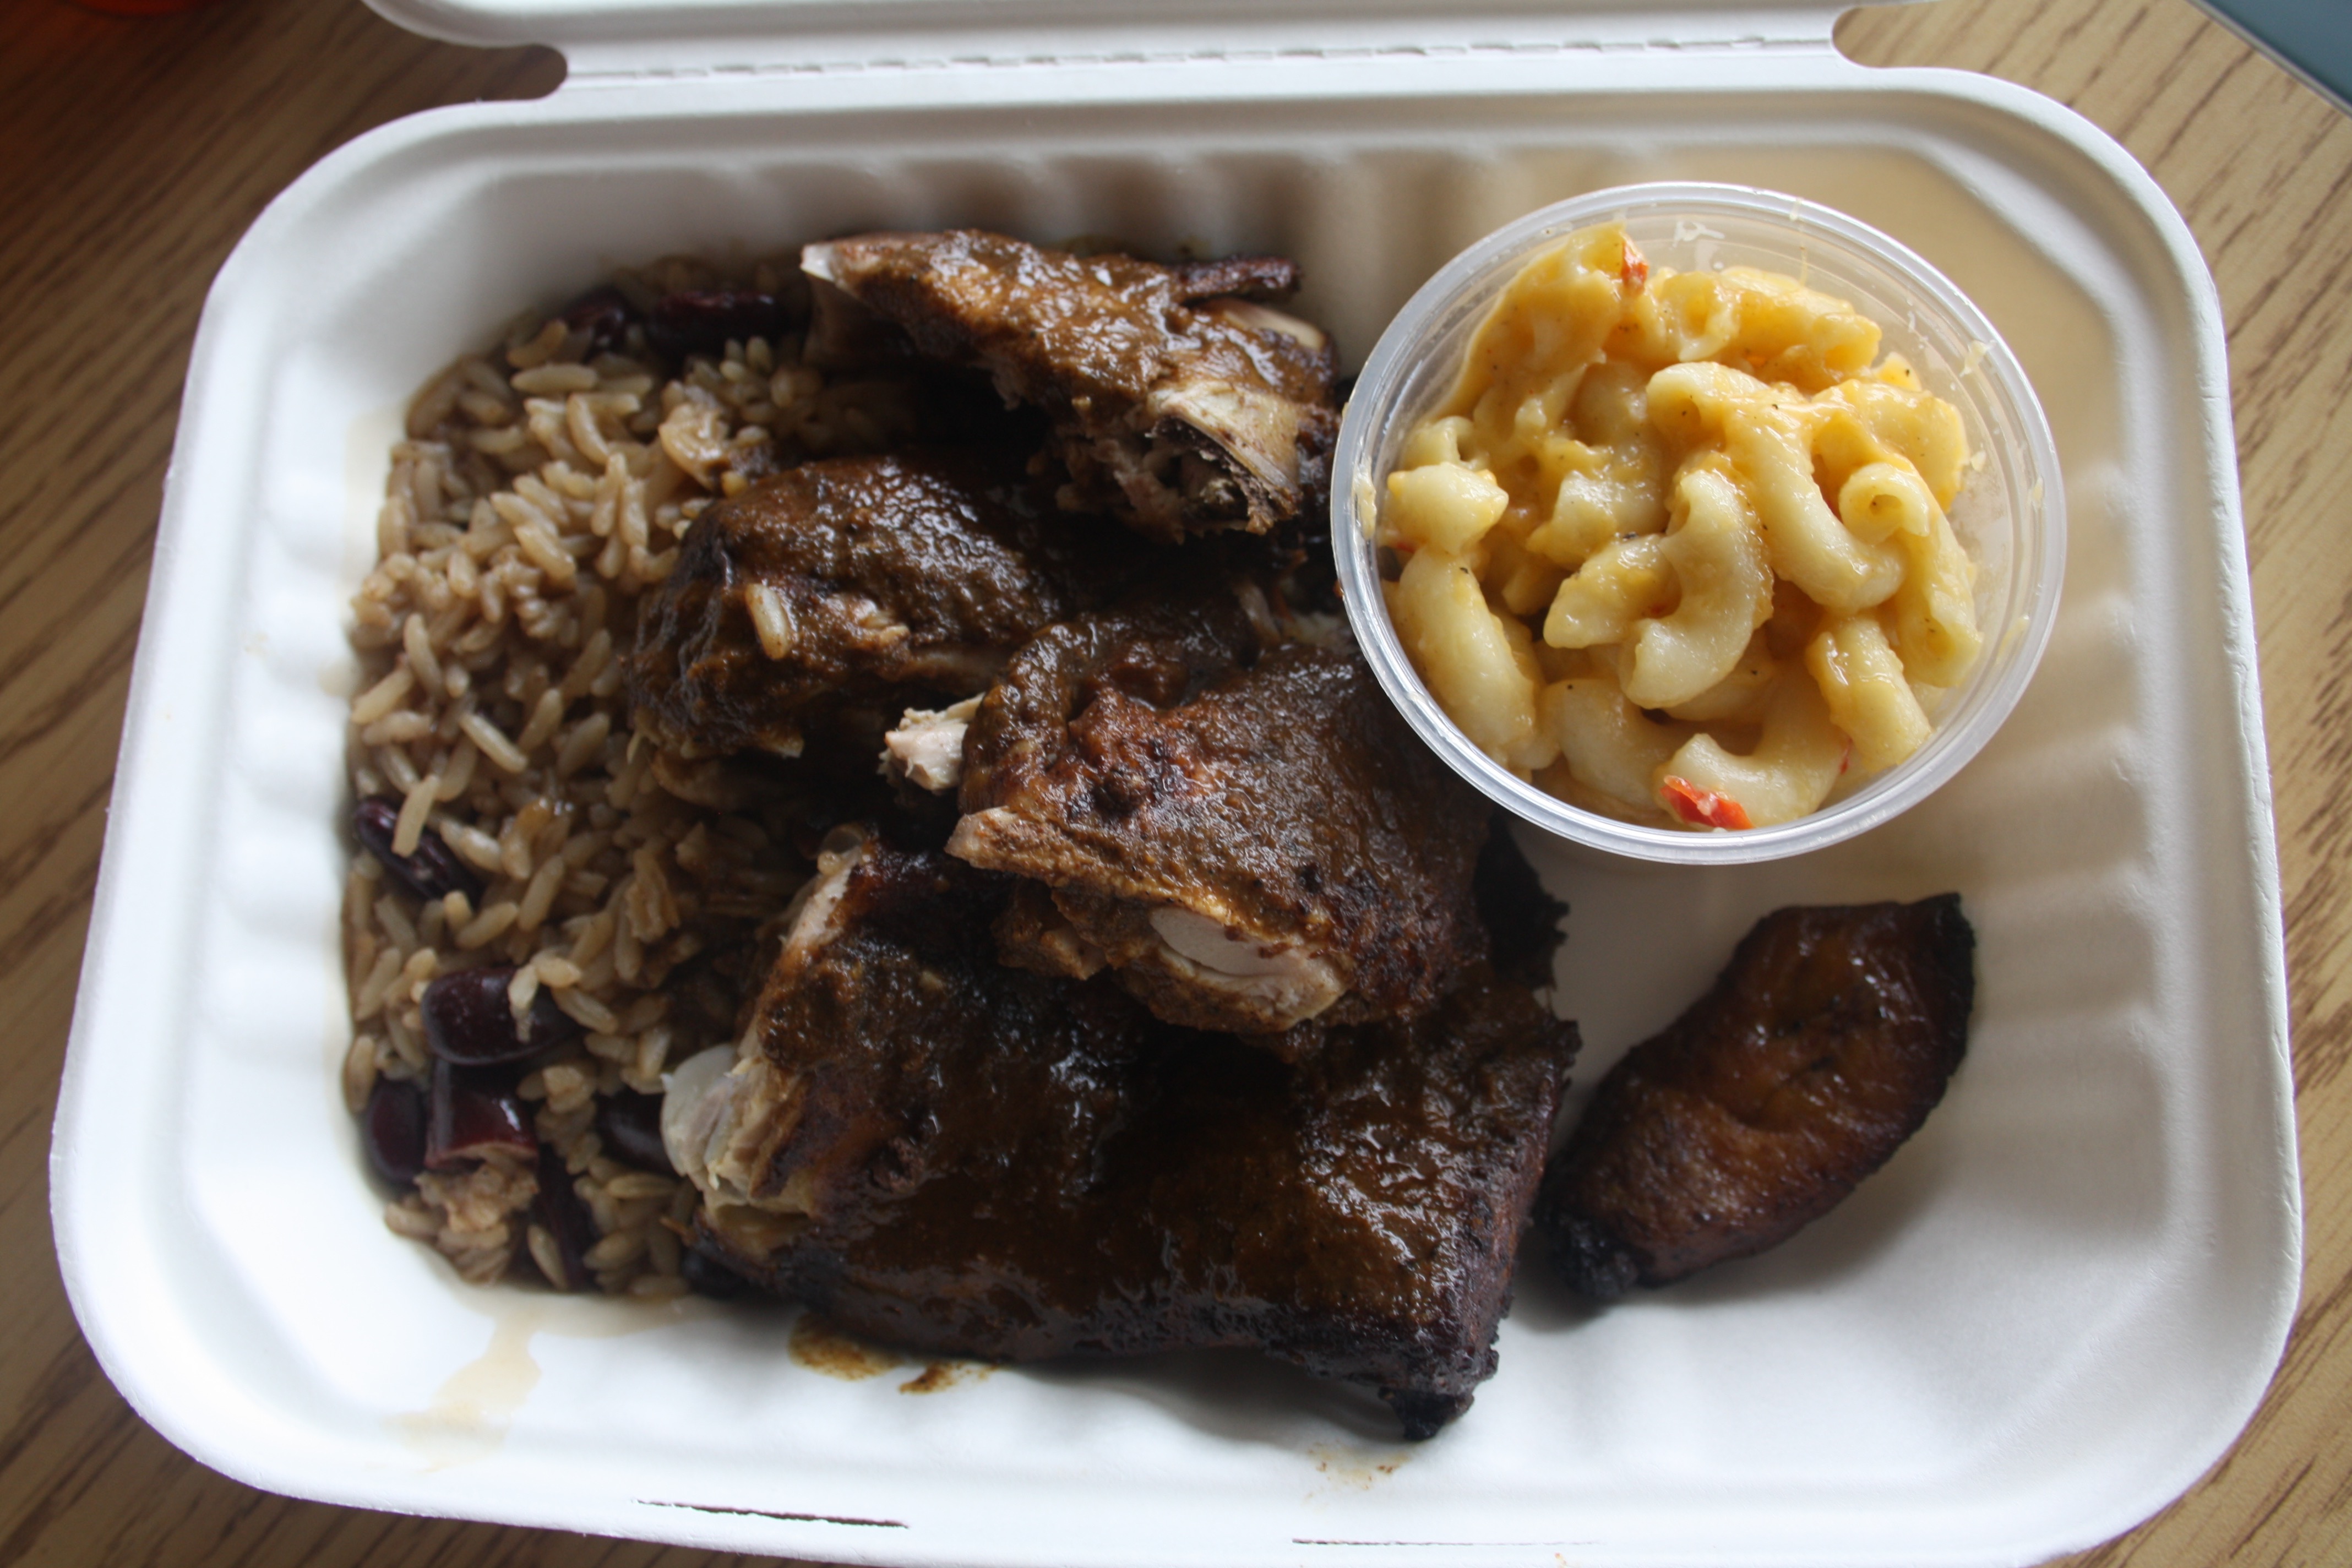 Jerk Chicken with a crispy dark skin served with baked mac and cheese and spicy 'n peas. Photo by Rebecca Wells.